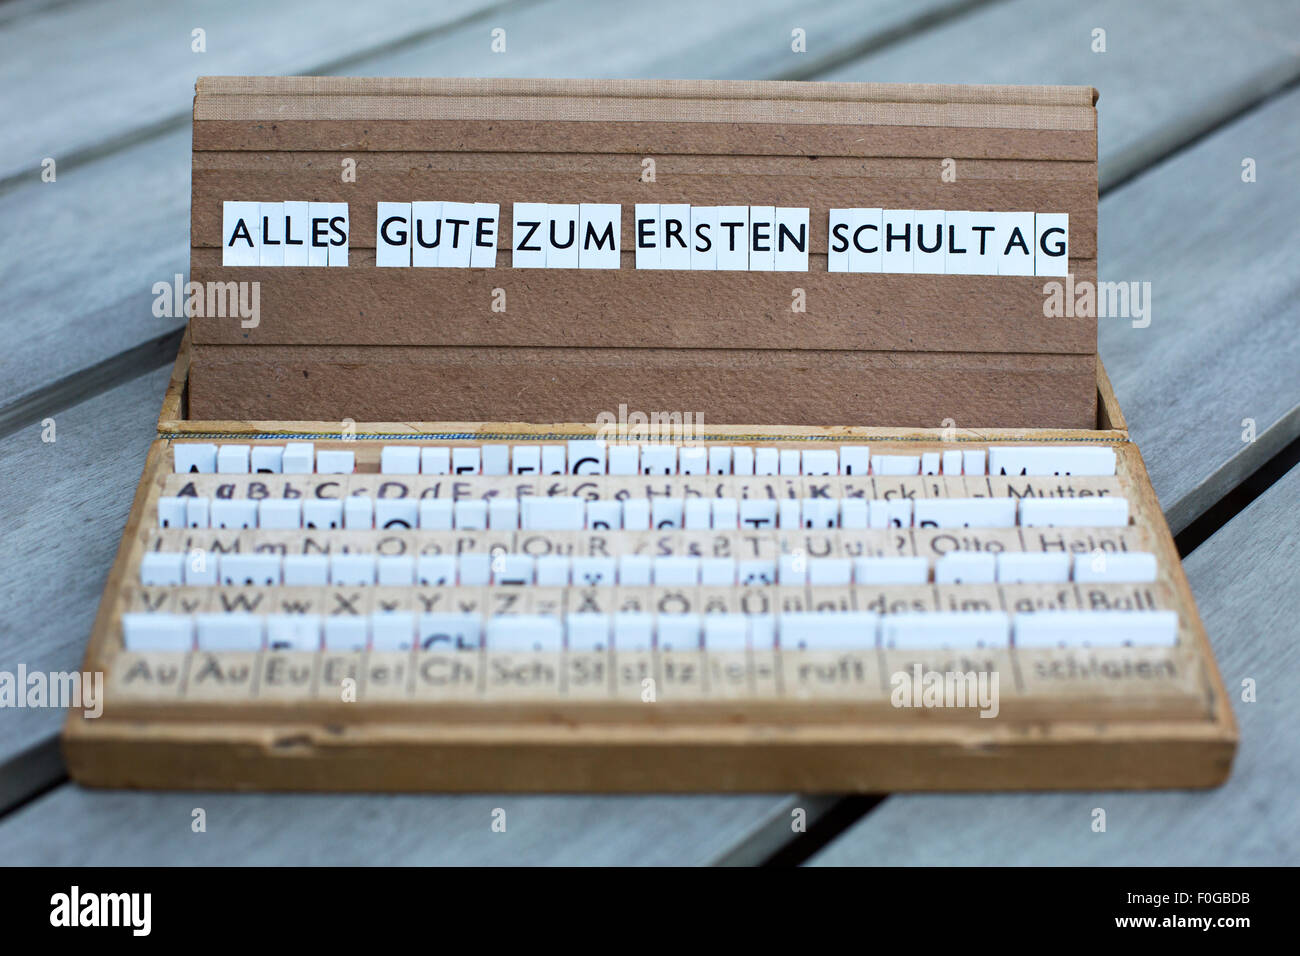 a letterbox with the german text: 'Alles Gute Zum Ersten Schultag' (all the best for your first day at school) Stock Photo